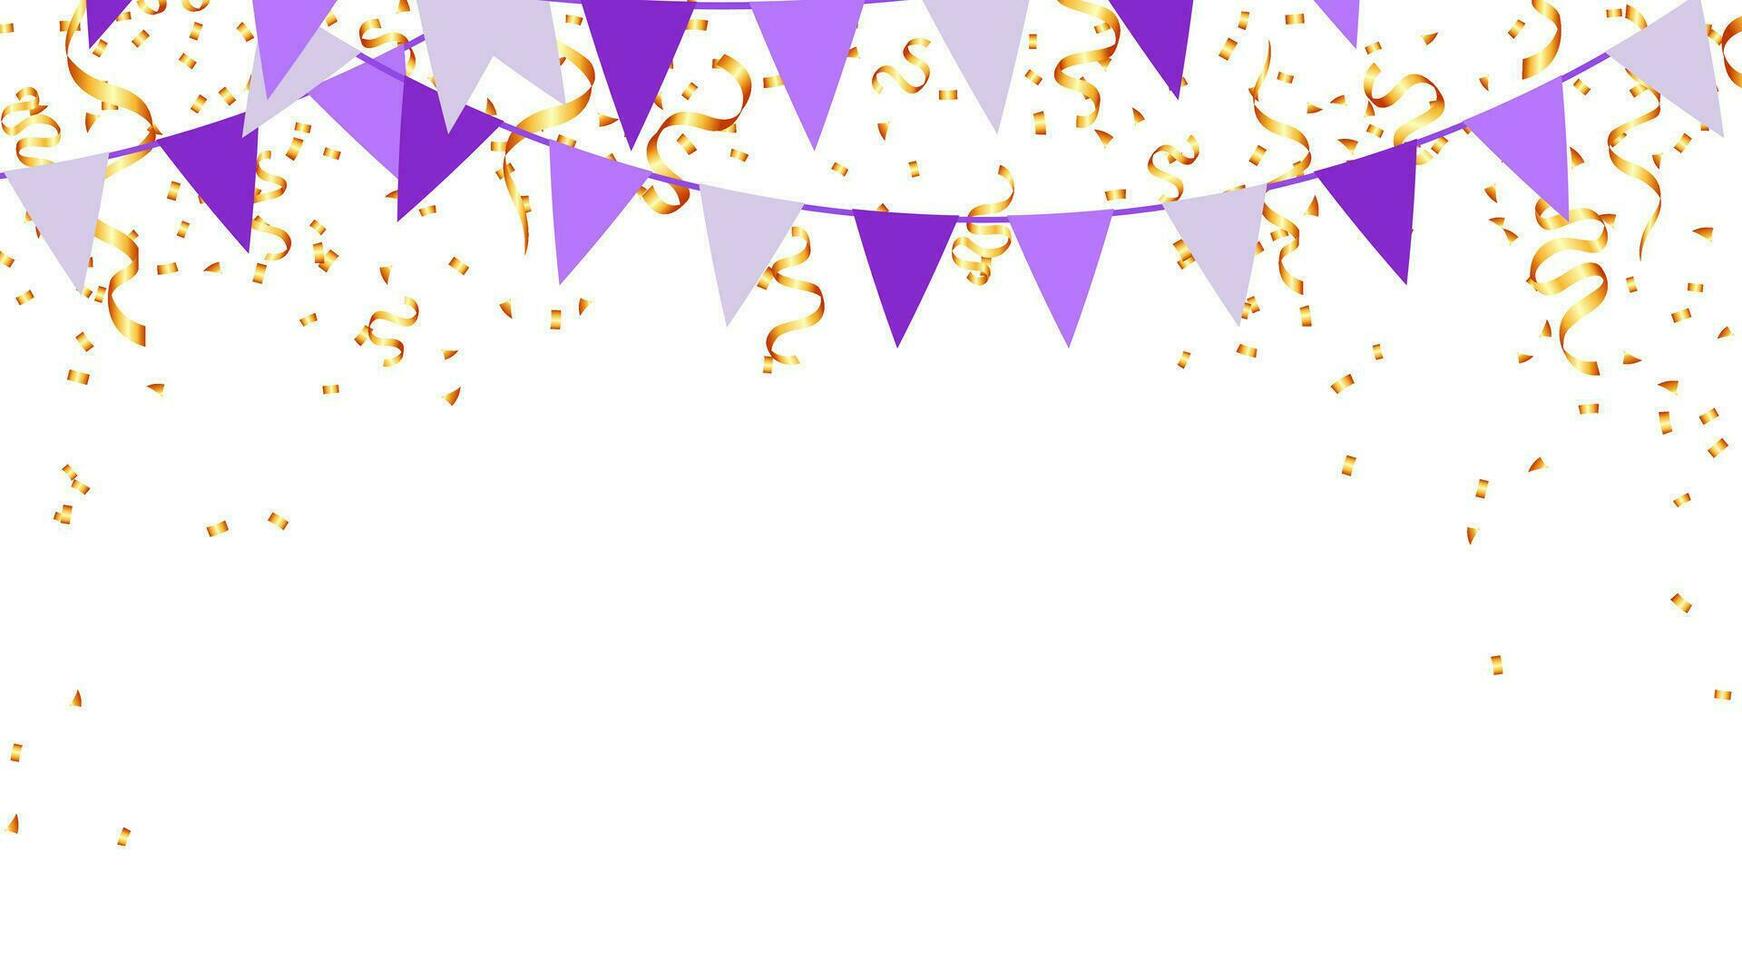 Flag garlands purple color and falling gold confetti isolated ornament background for birthday, party, festival vector